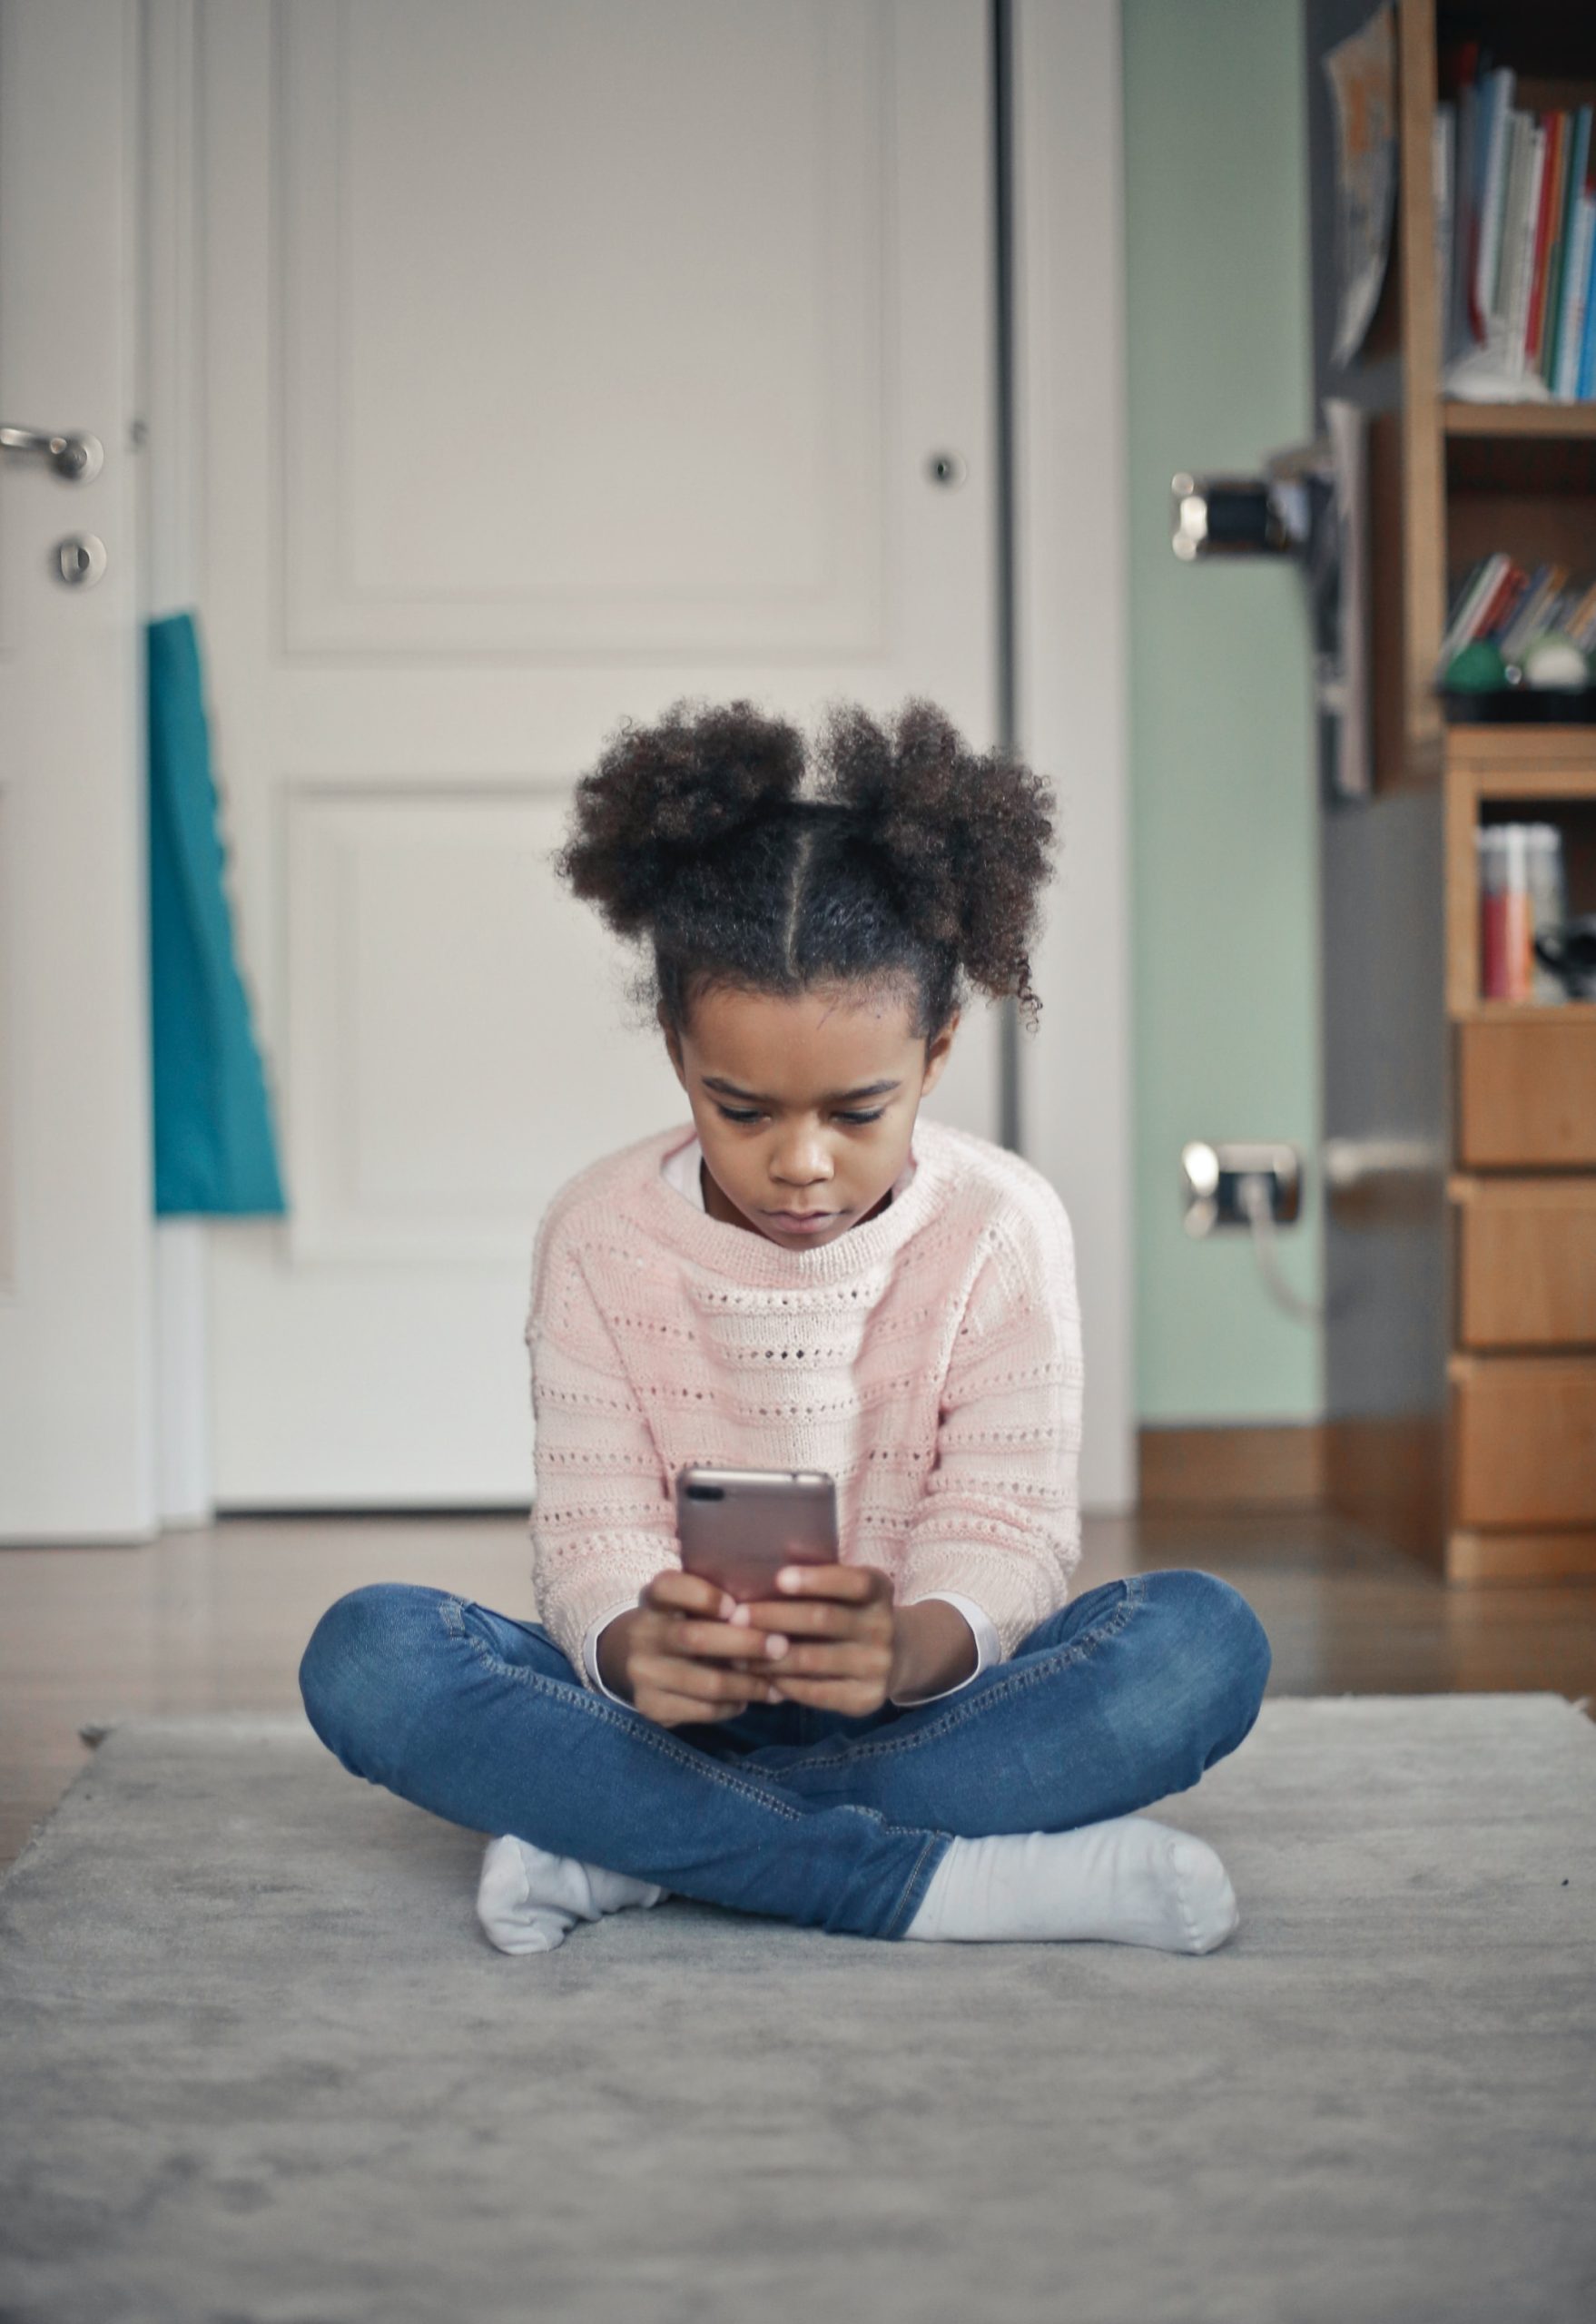 TikTok Trends and Challenges: What Parents Need to Know